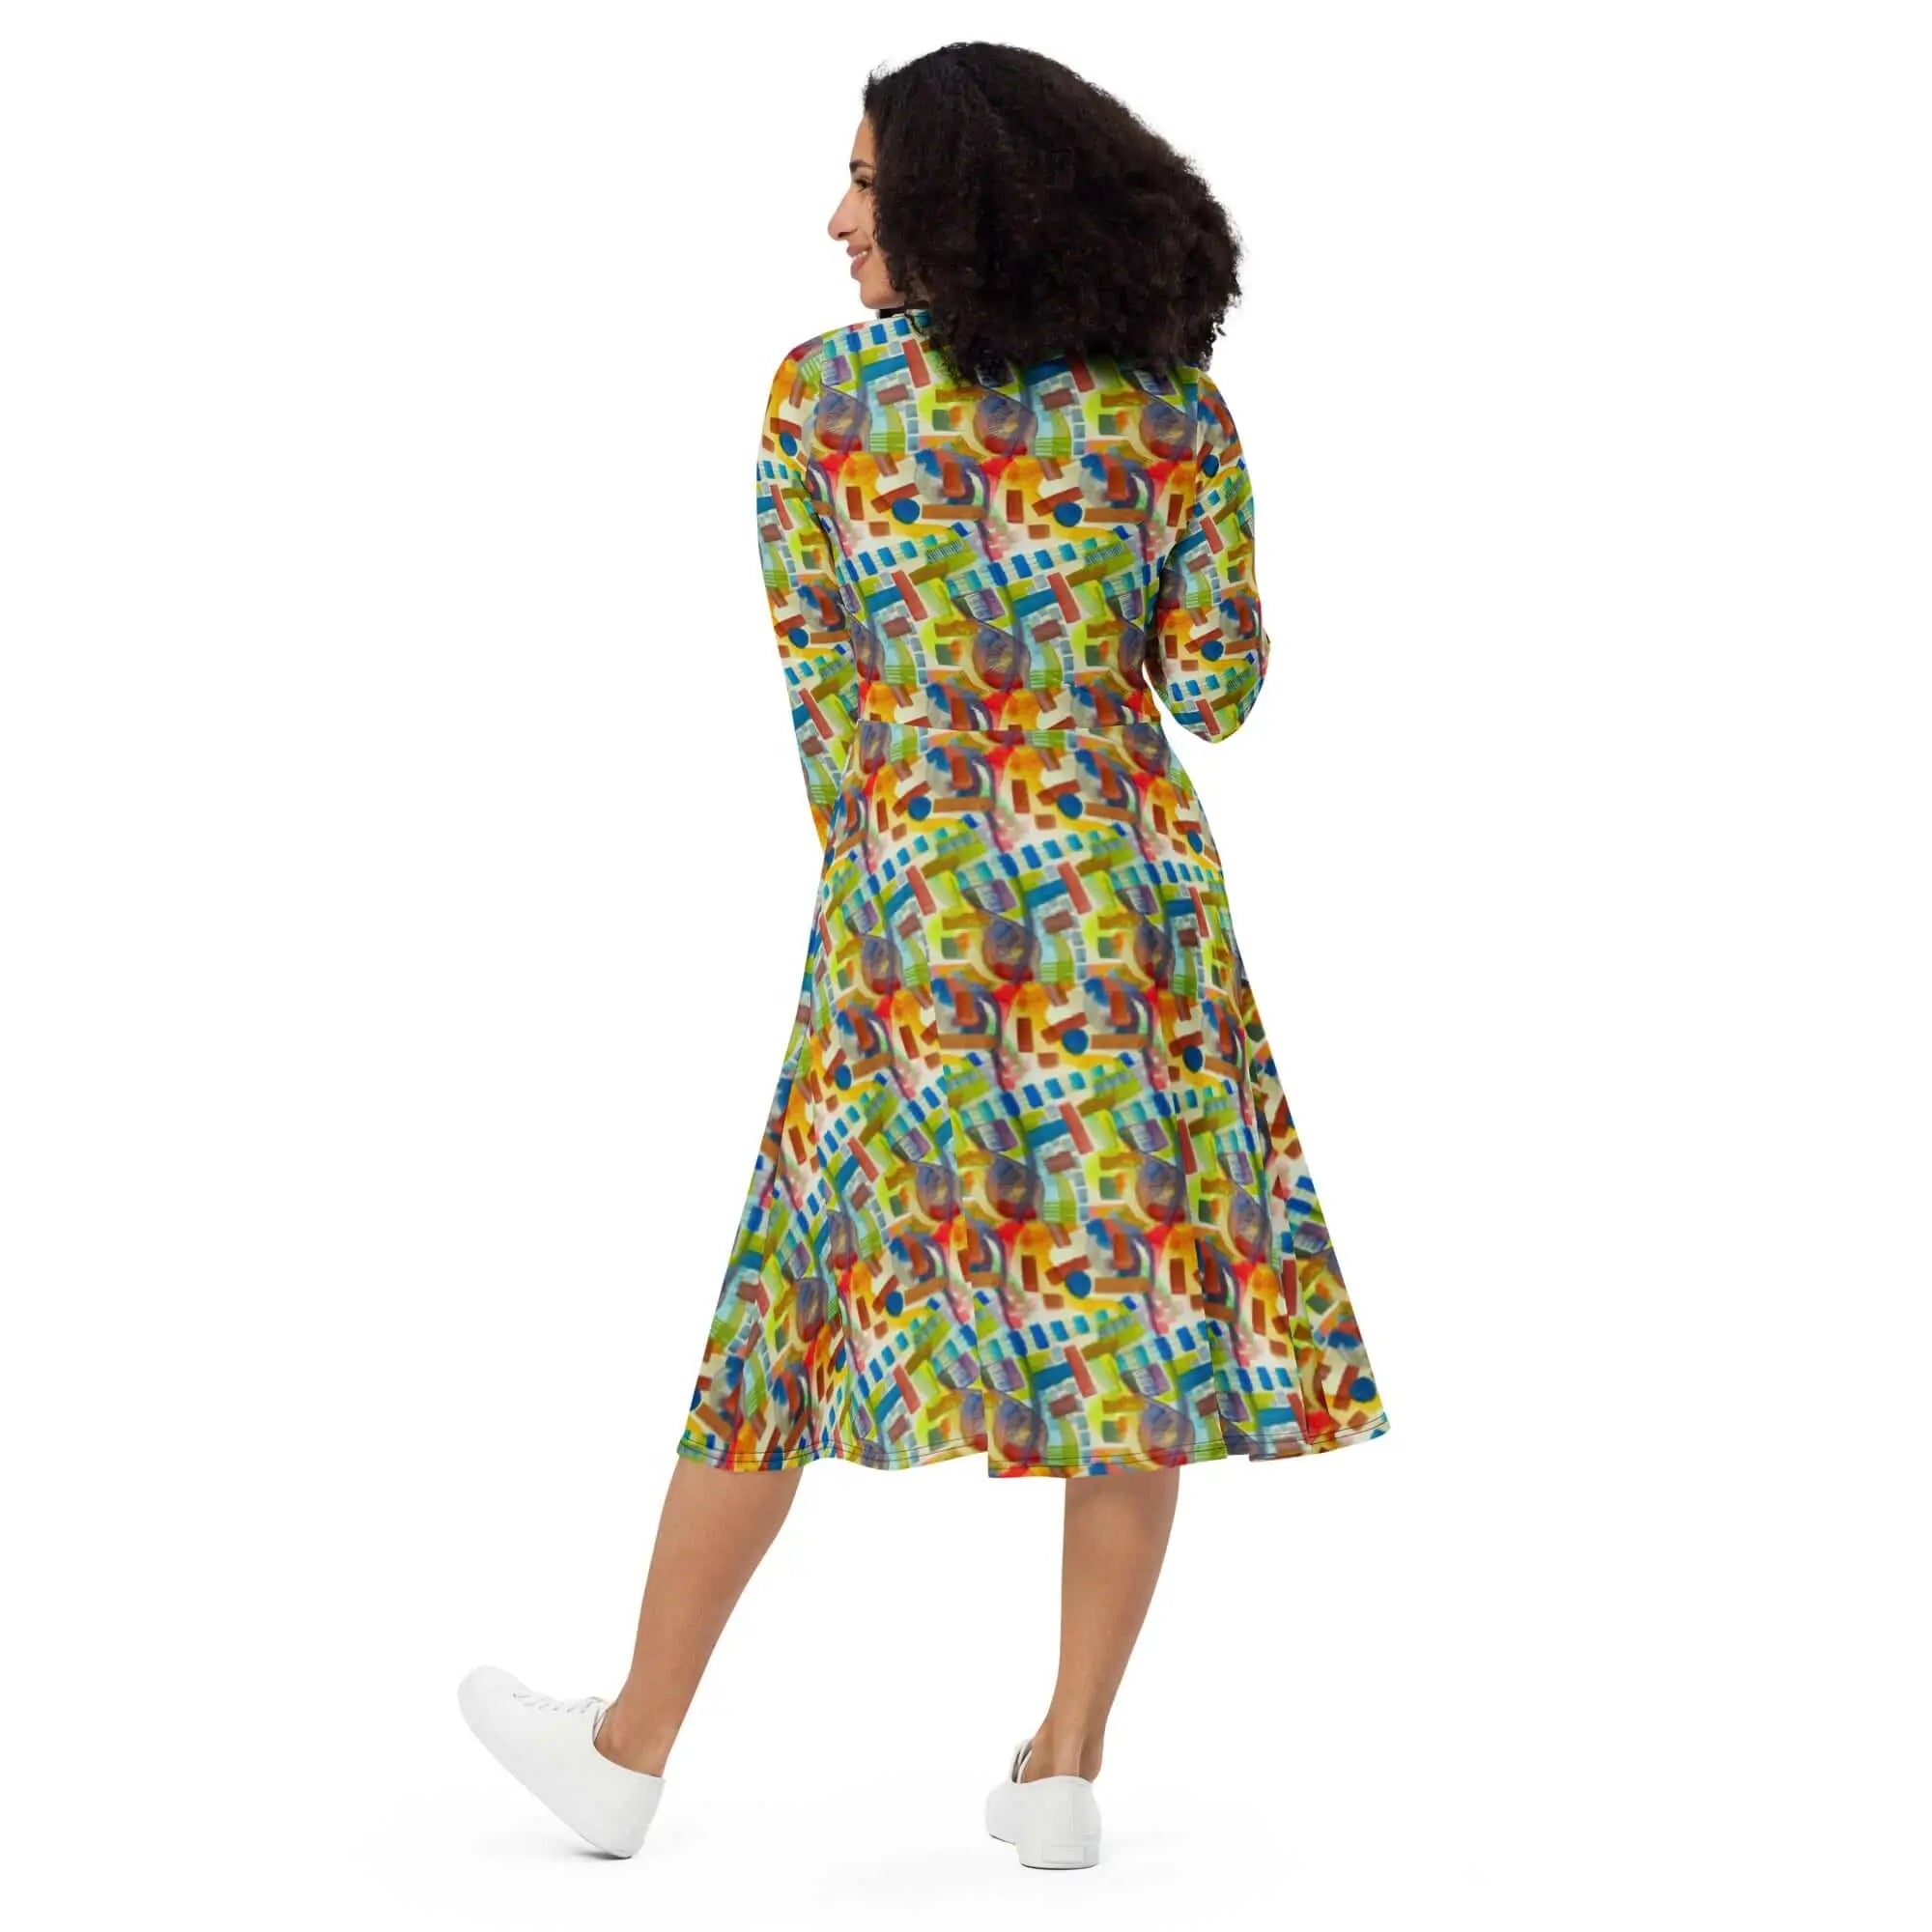 Colorful midi dress with woman in white shoes - Long Sleeve Midi Dress | Vibrant Abstract